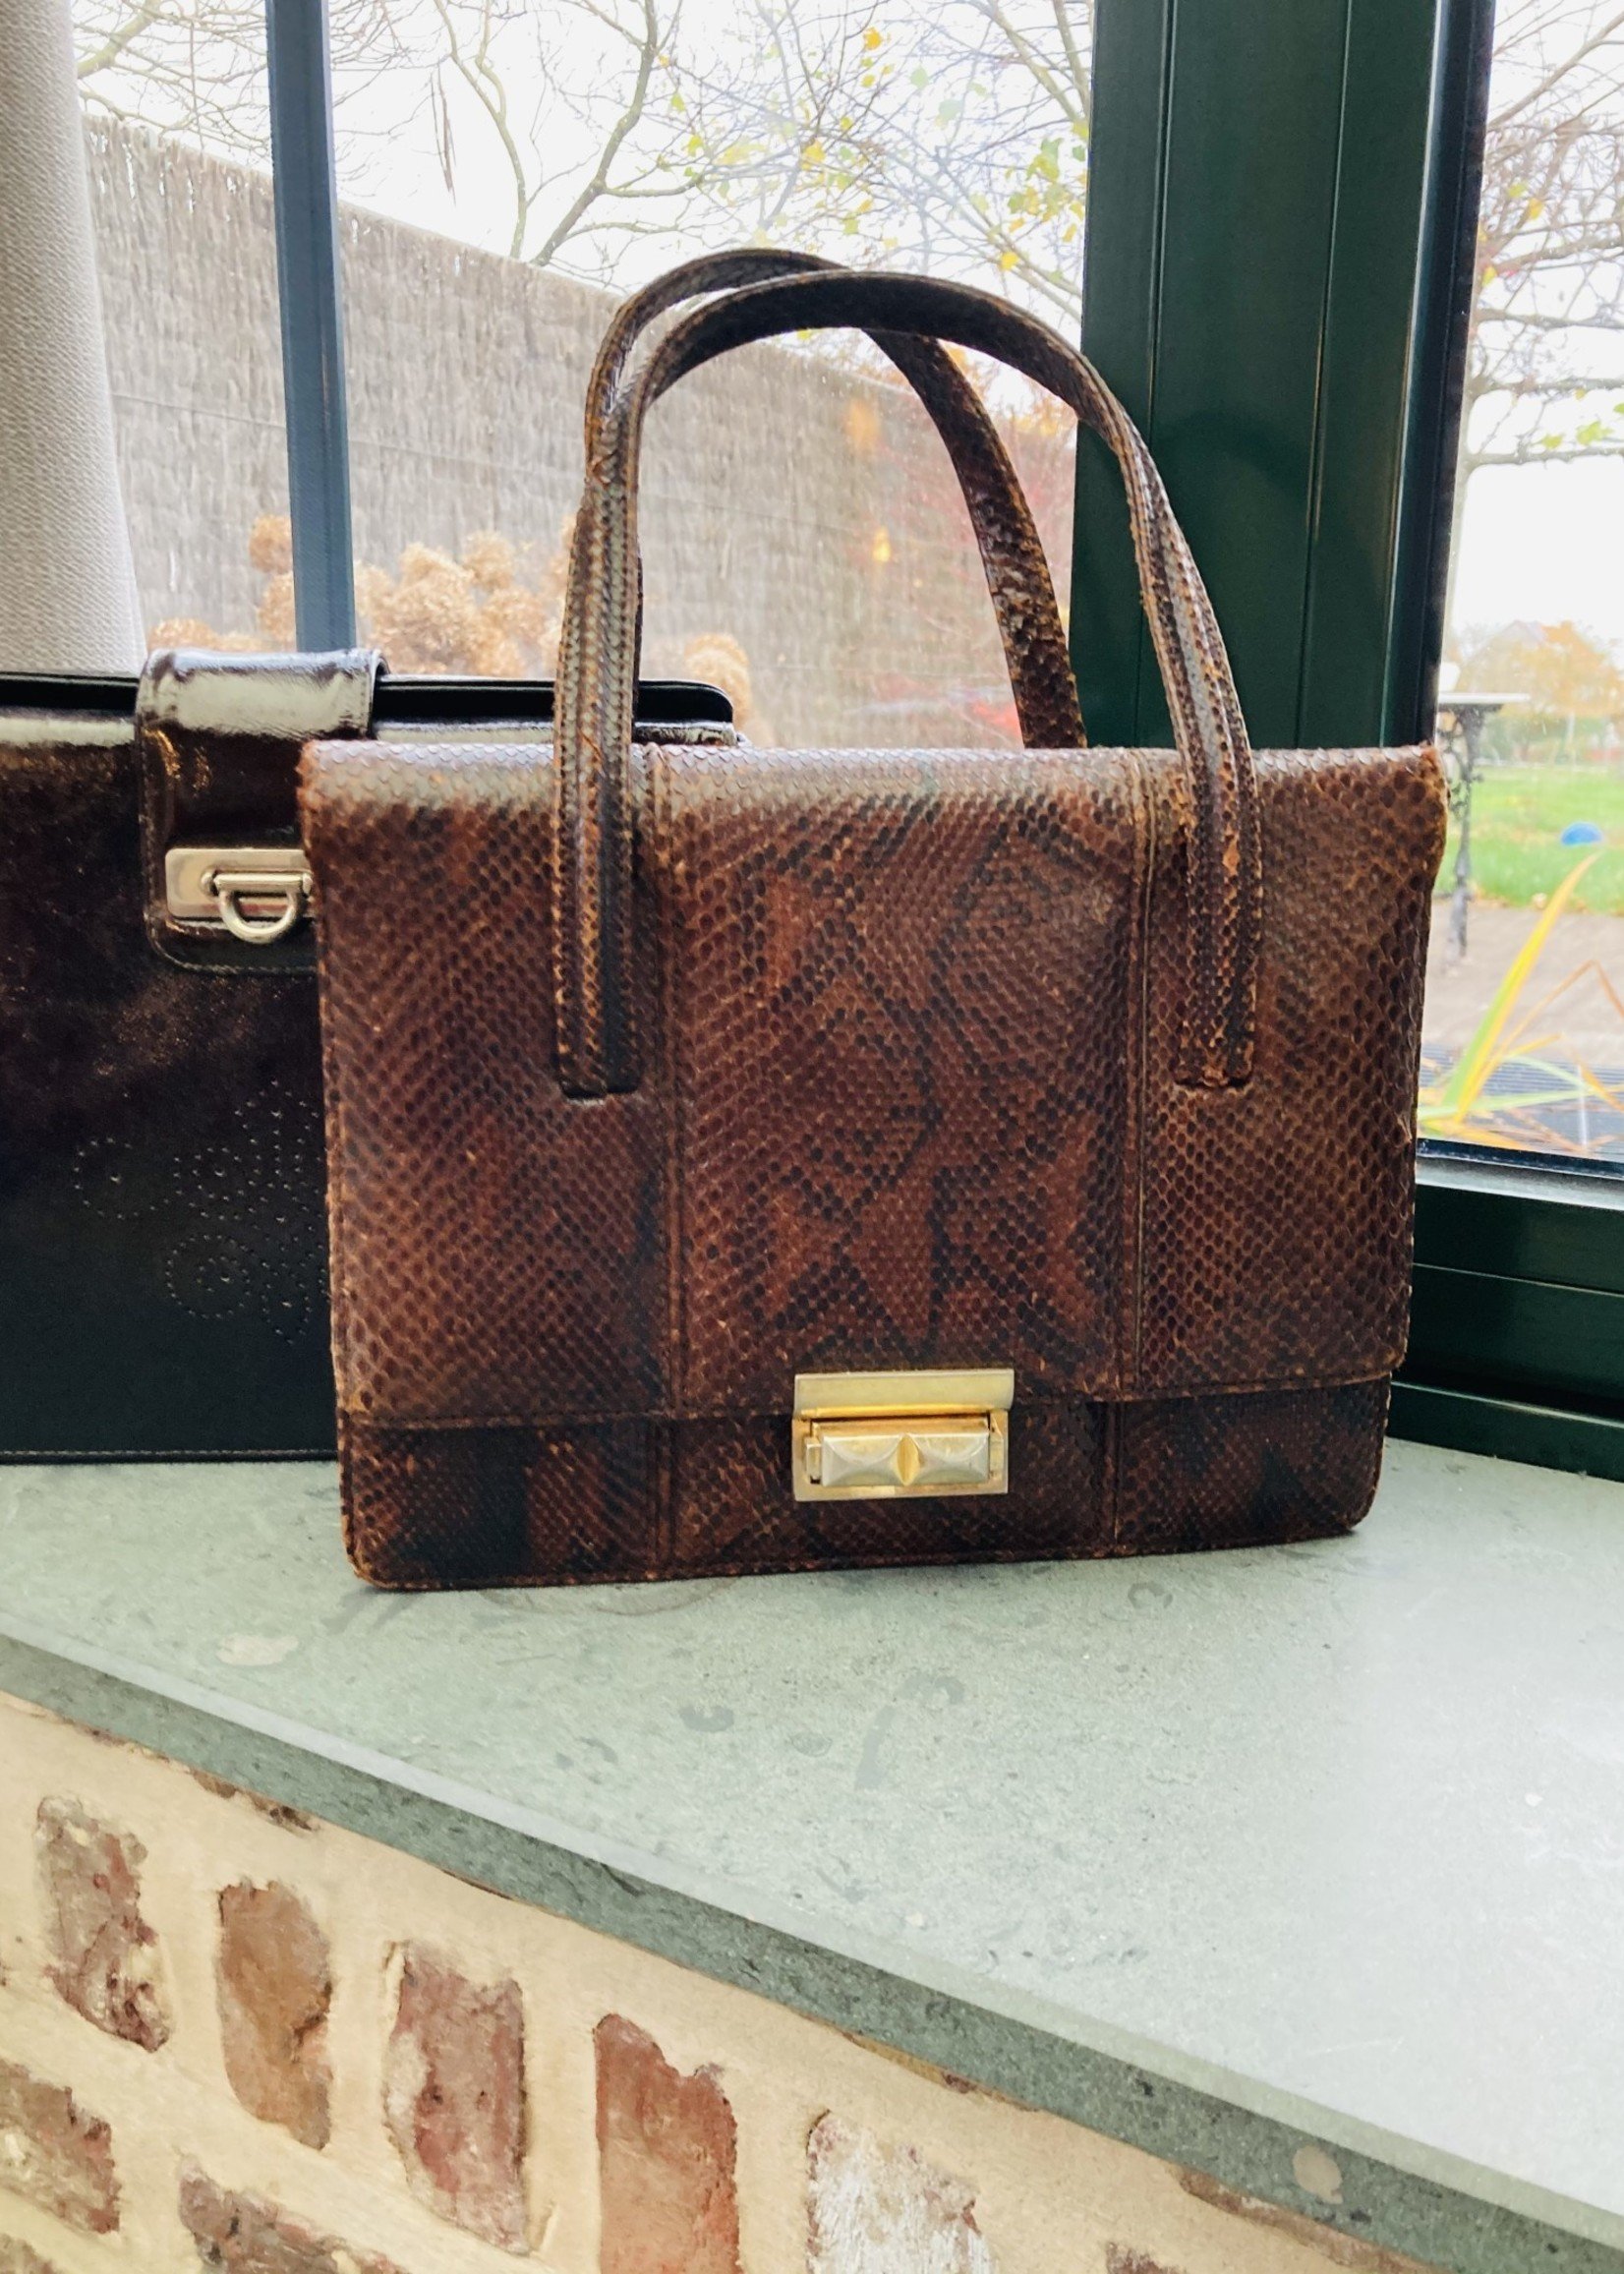 Brown leather (python) handbag with brass and leather closure